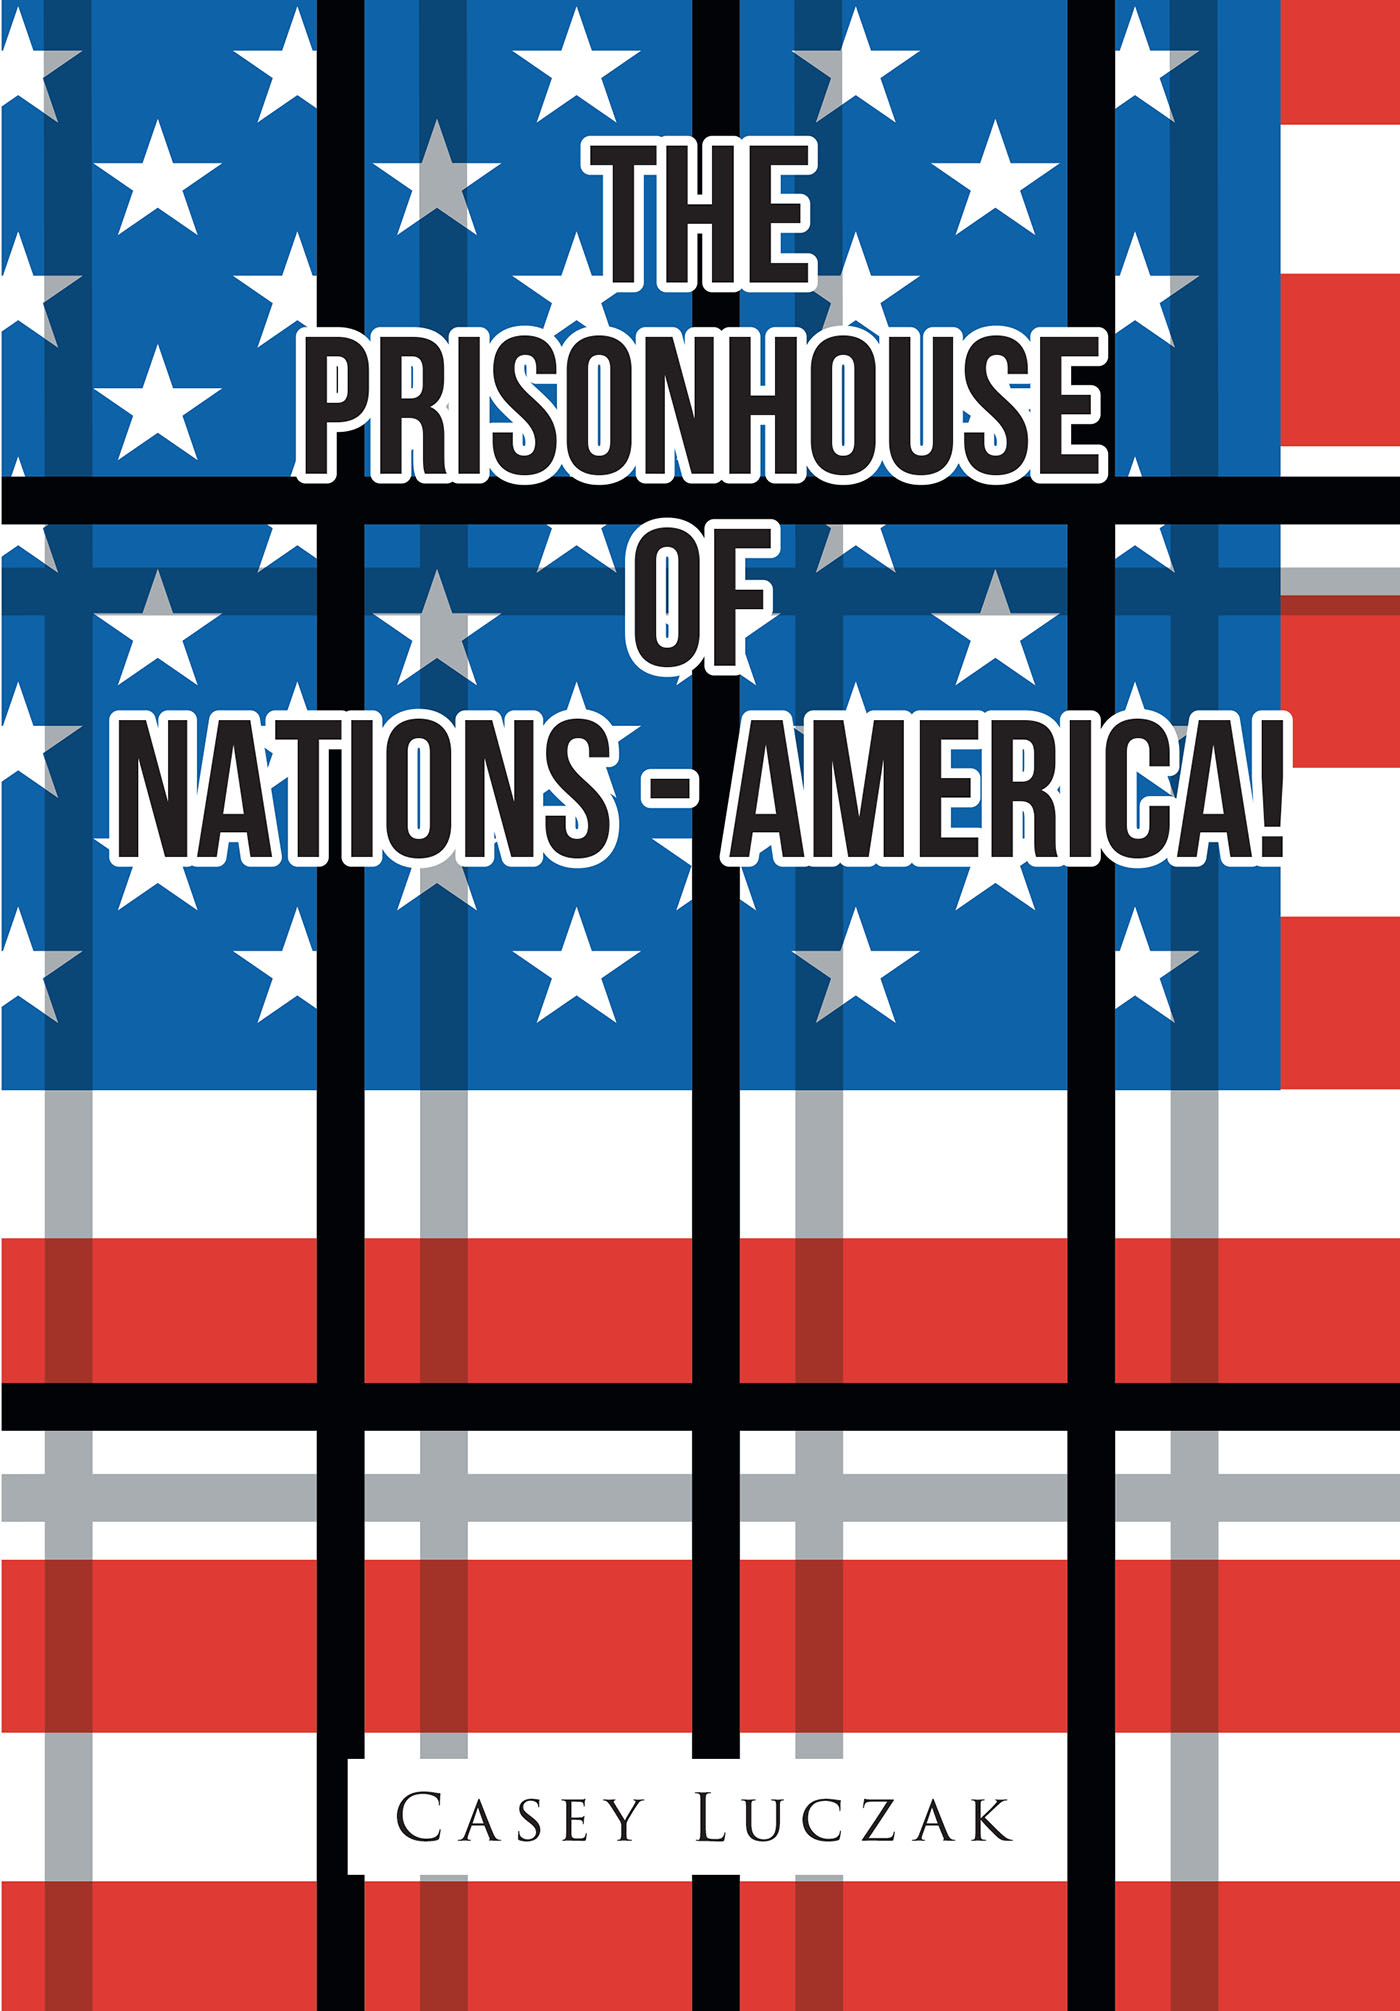 The Prisonhouse of Nations - America! Cover Image